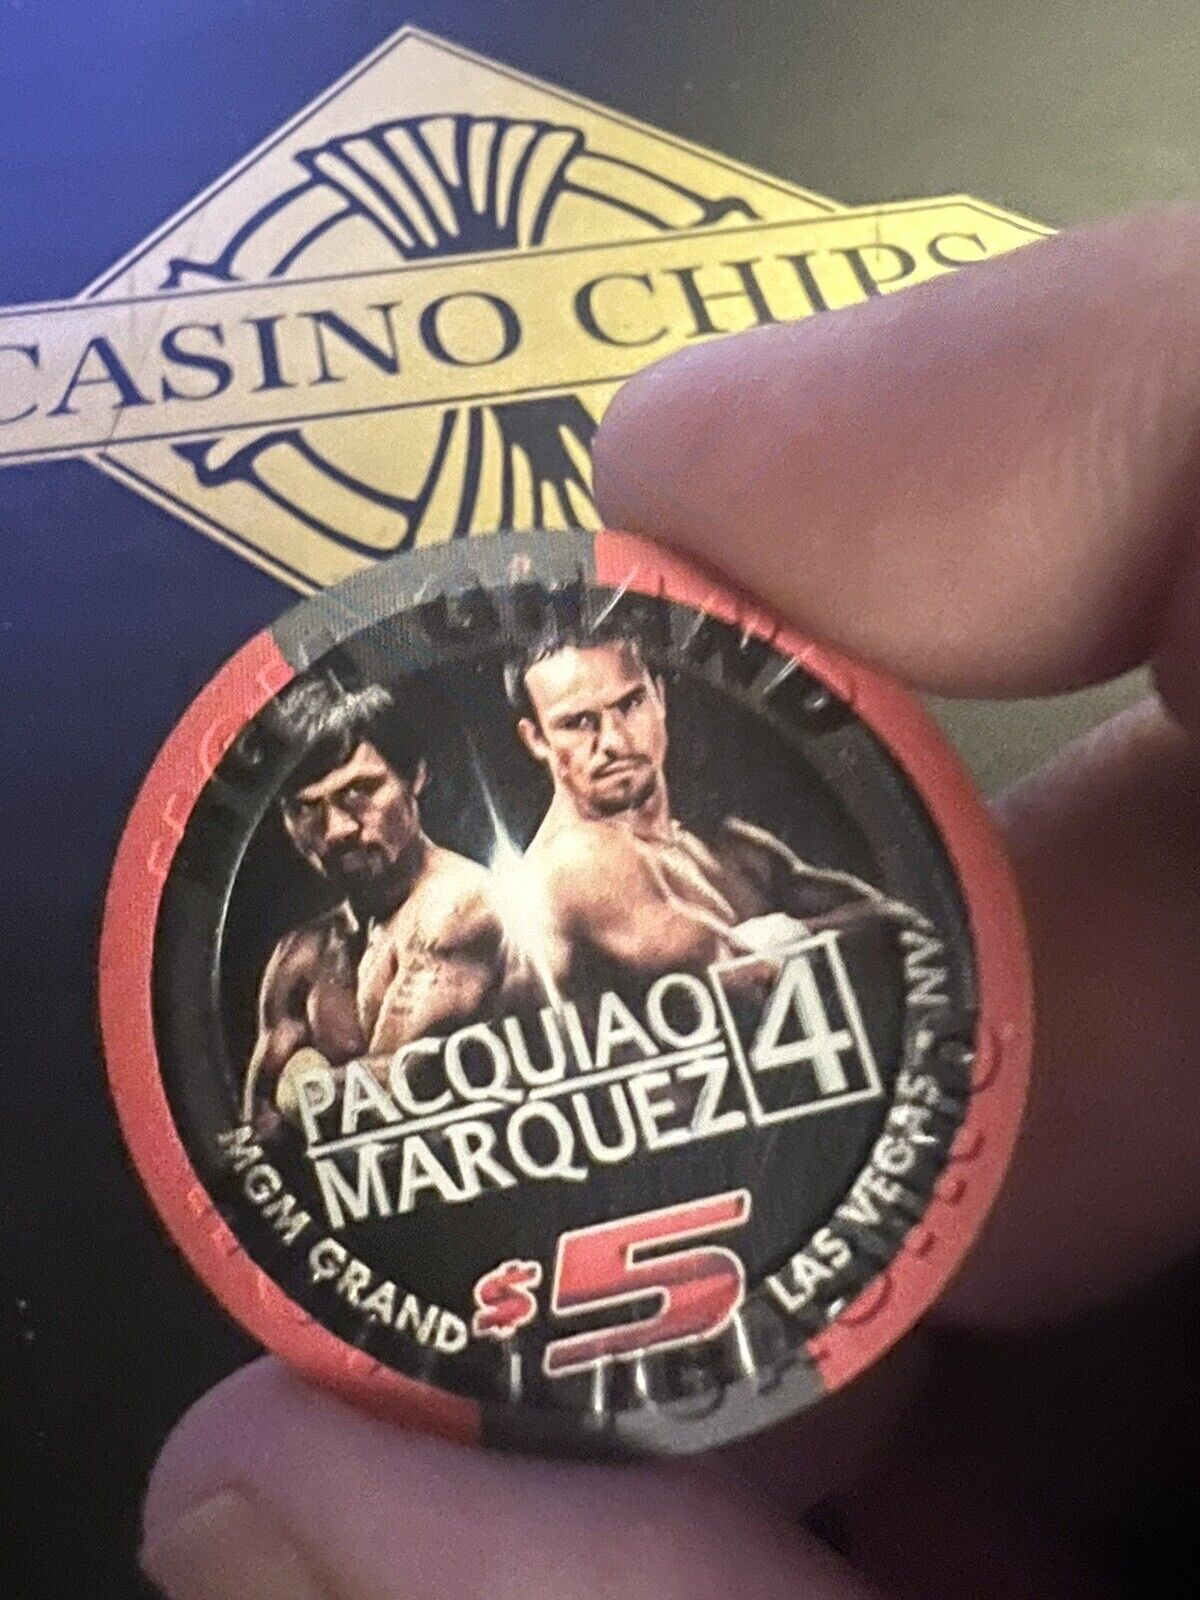 Authentic Collectable Casino Poker Chip / RARE / PACQUIAO Vs MARQUEZ 4 MGM Vegas